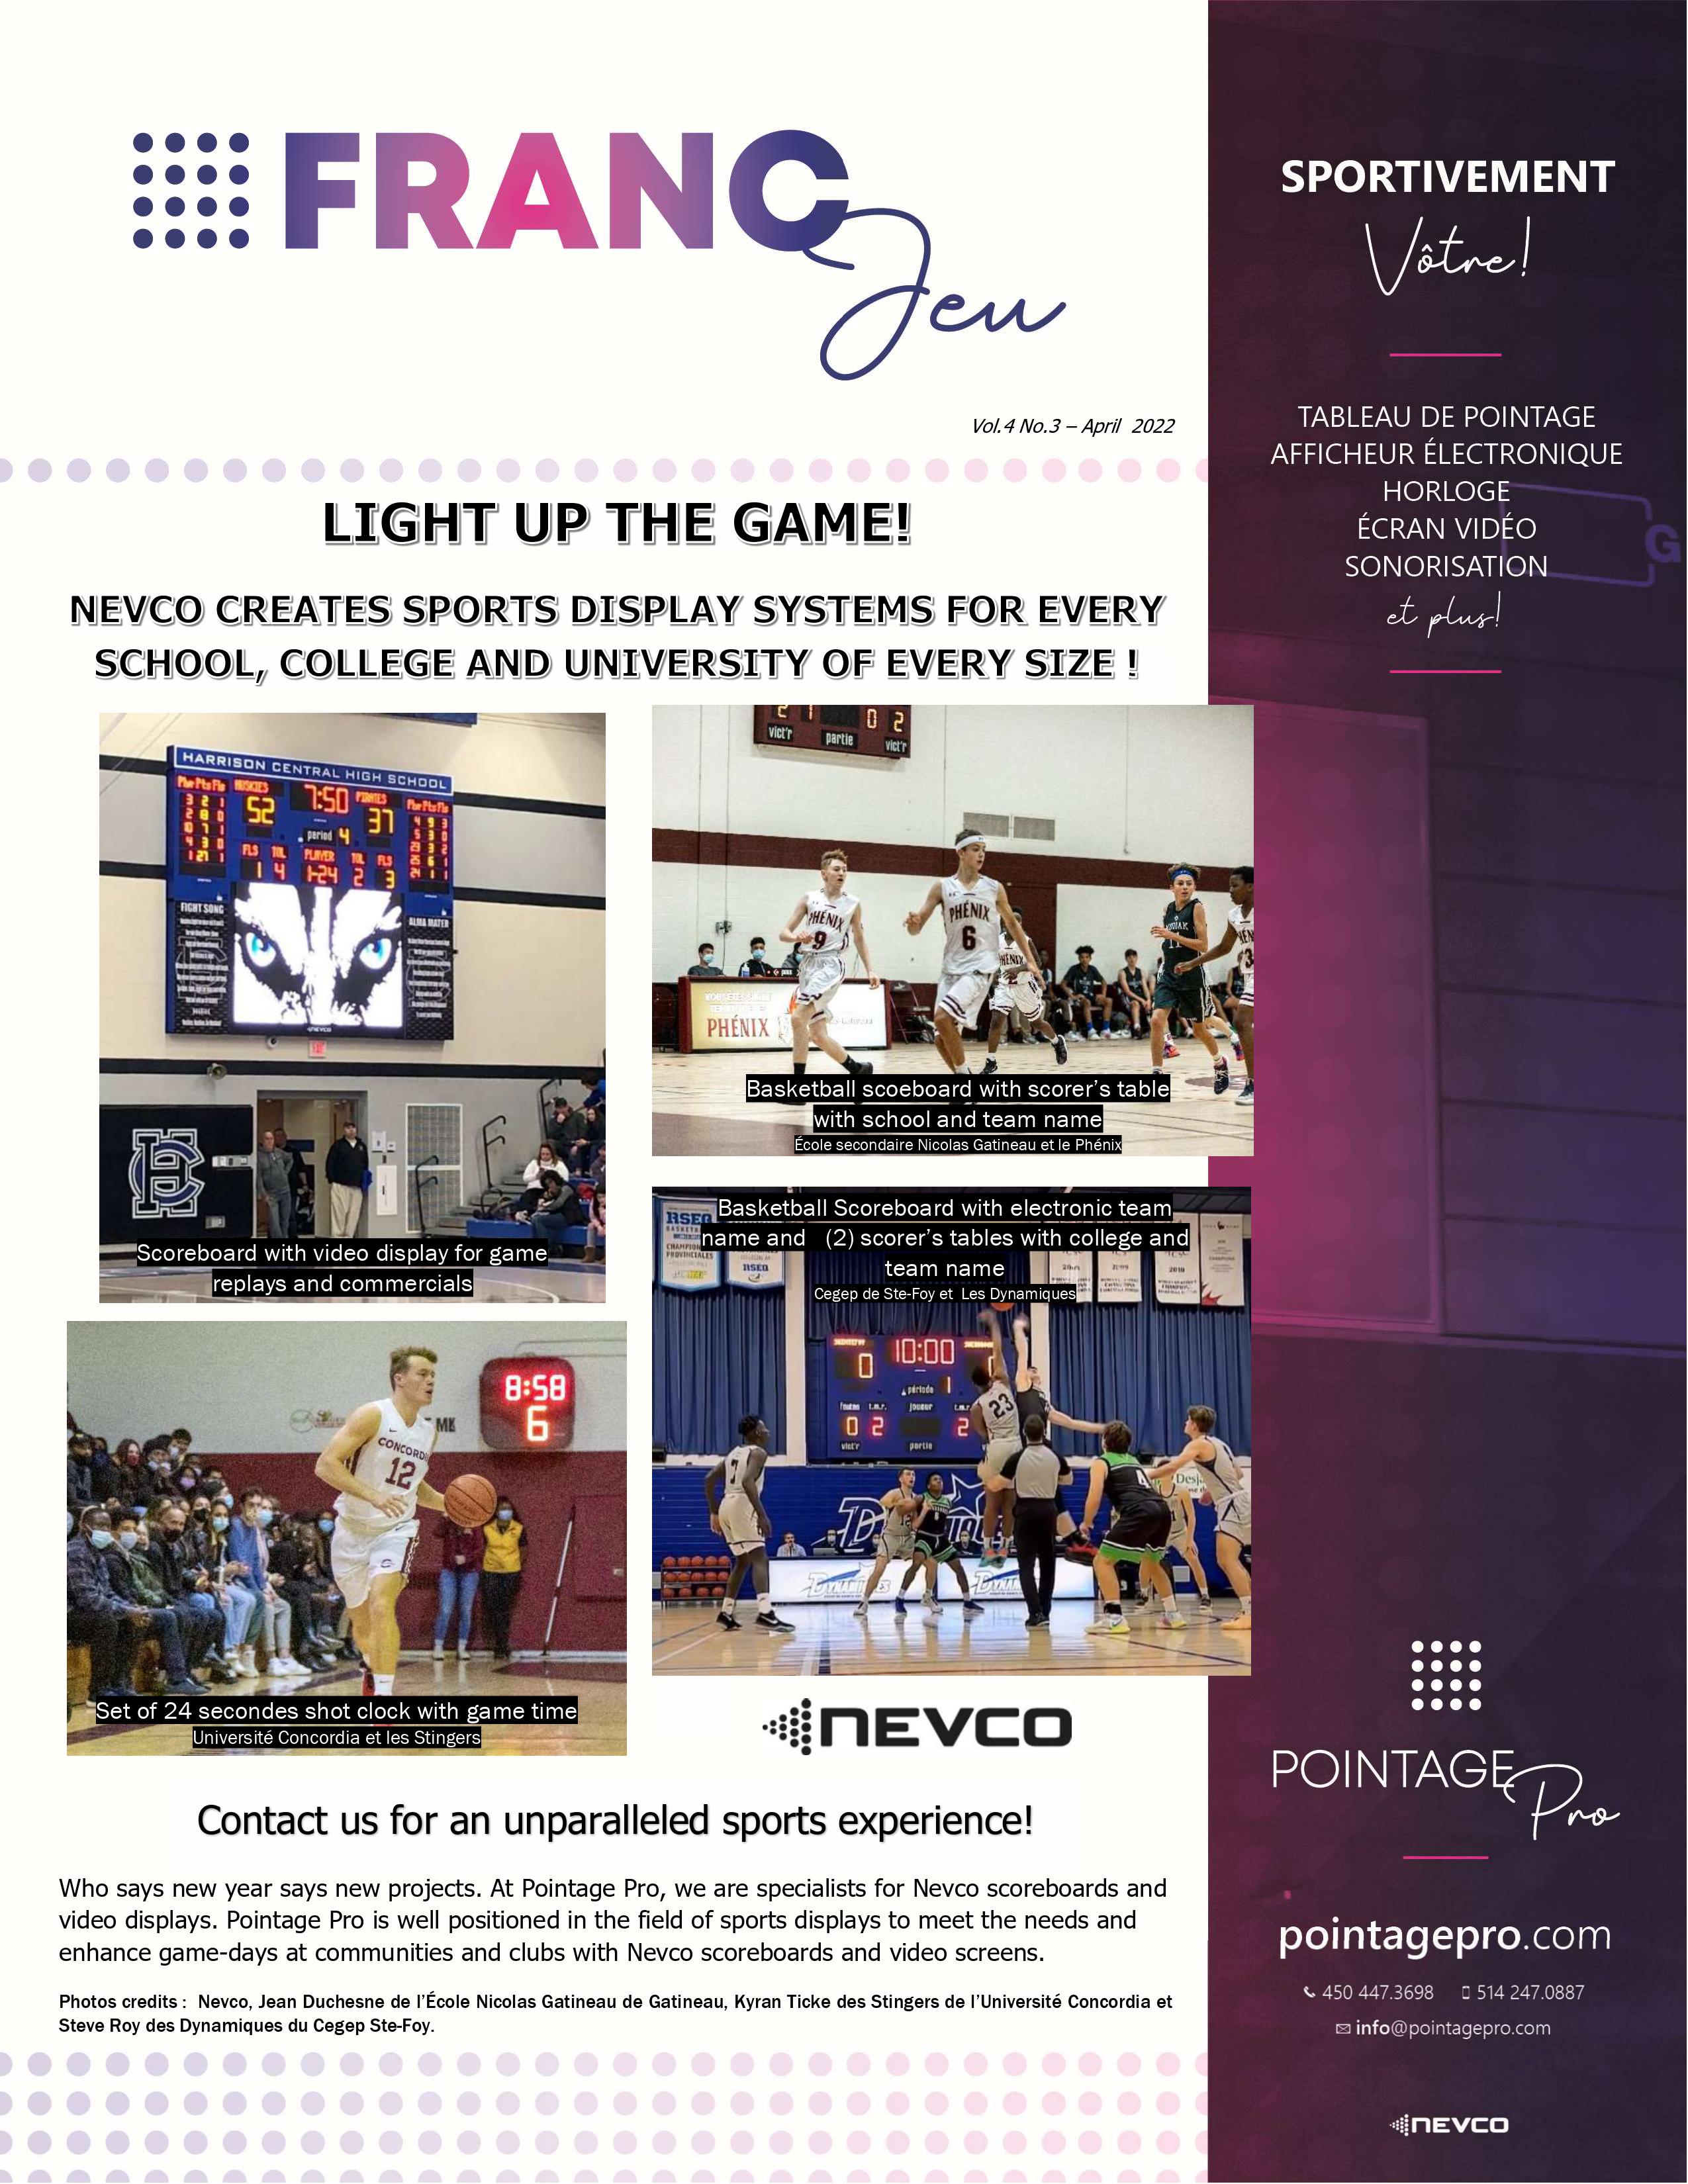 Light up the game with a Nevco sport display